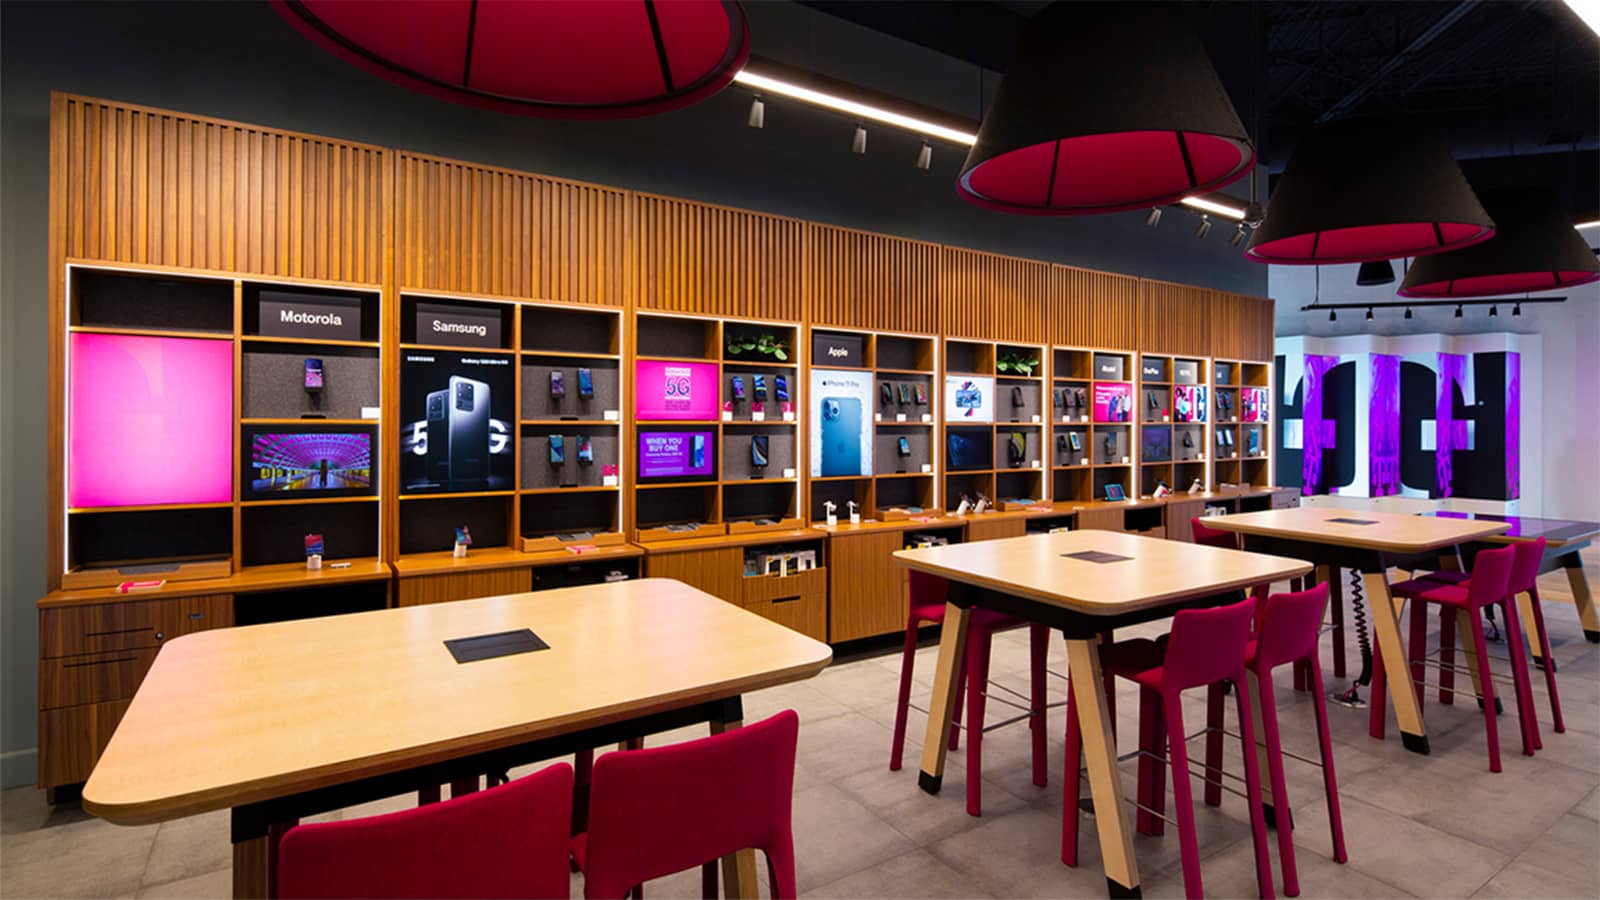 The retail floor of T-Mobile's Plano location.